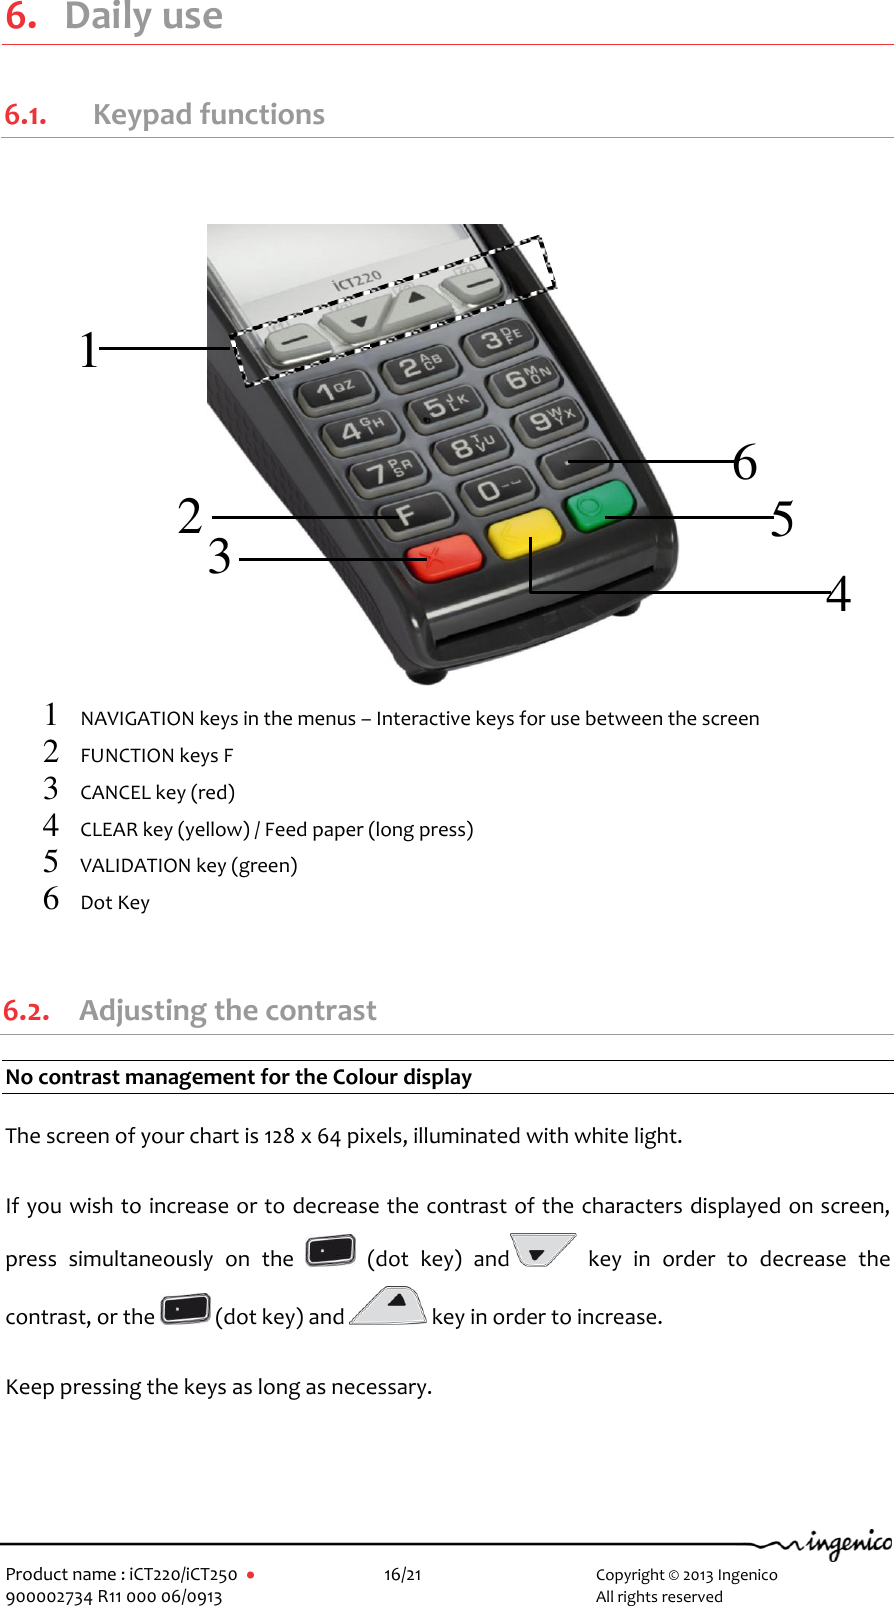   Product name : iCT220/iCT250       16/21     Copyright © 2013 Ingenico 900002734 R11 000 06/0913        All rights reserved  6. Daily use 6.1.   Keypad functions                    1 NAVIGATION keys in the menus – Interactive keys for use between the screen   2 FUNCTION keys F 3 CANCEL key (red) 4 CLEAR key (yellow) / Feed paper (long press) 5 VALIDATION key (green) 6 Dot Key   6.2. Adjusting the contrast No contrast management for the Colour display  The screen of your chart is 128 x 64 pixels, illuminated with white light.  If you wish to increase or to decrease the contrast of the characters displayed on screen, press  simultaneously  on  the    (dot  key)  and   key  in  order  to  decrease  the contrast, or the   (dot key) and   key in order to increase.  Keep pressing the keys as long as necessary.   1 2 3 4 5 6 